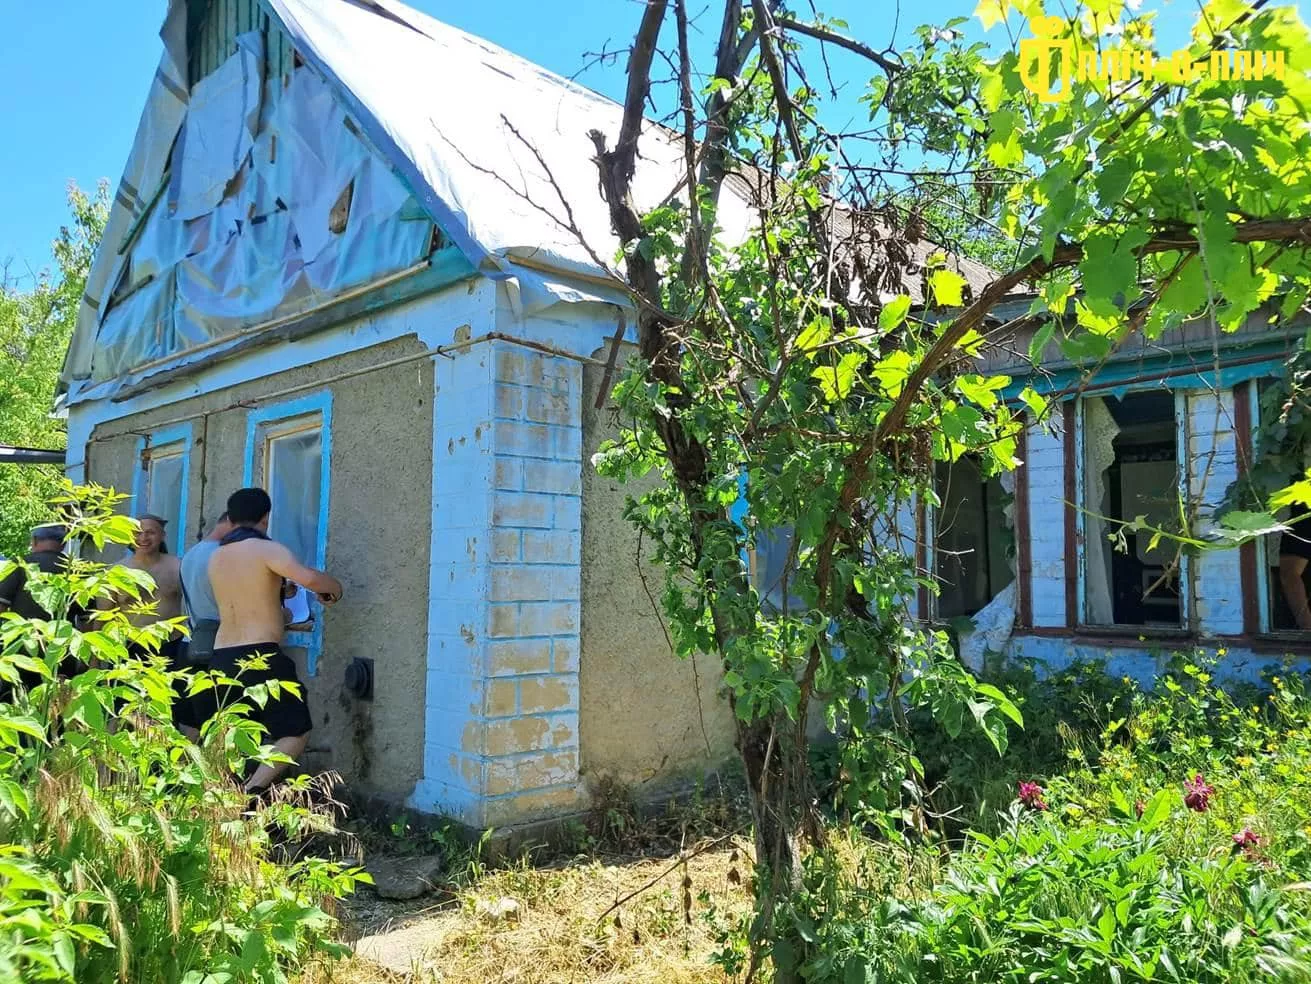 Cherkassy joins the project to rebuild de-occupied settlements in Kherson Region